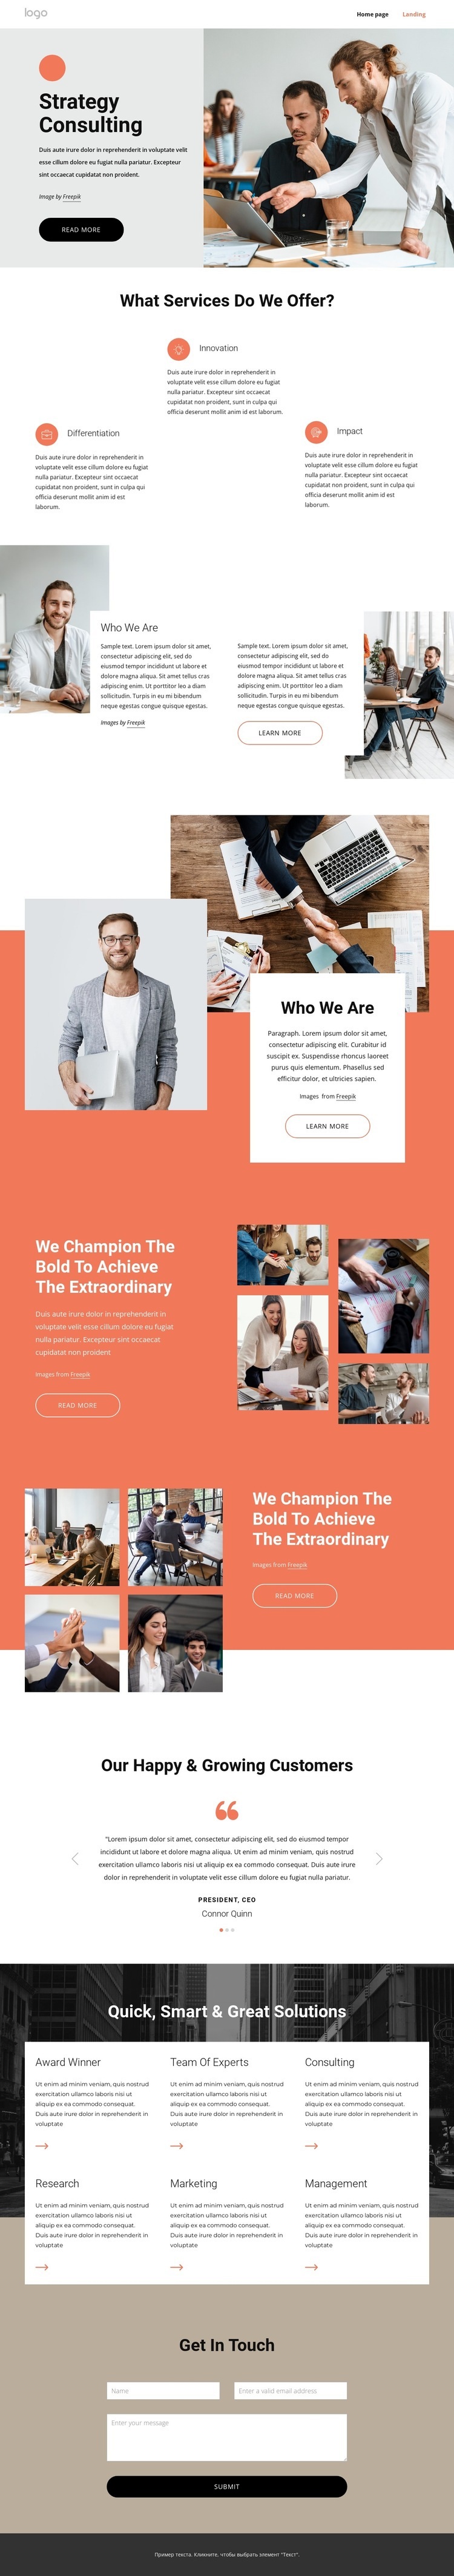 Align your technology strategy Homepage Design